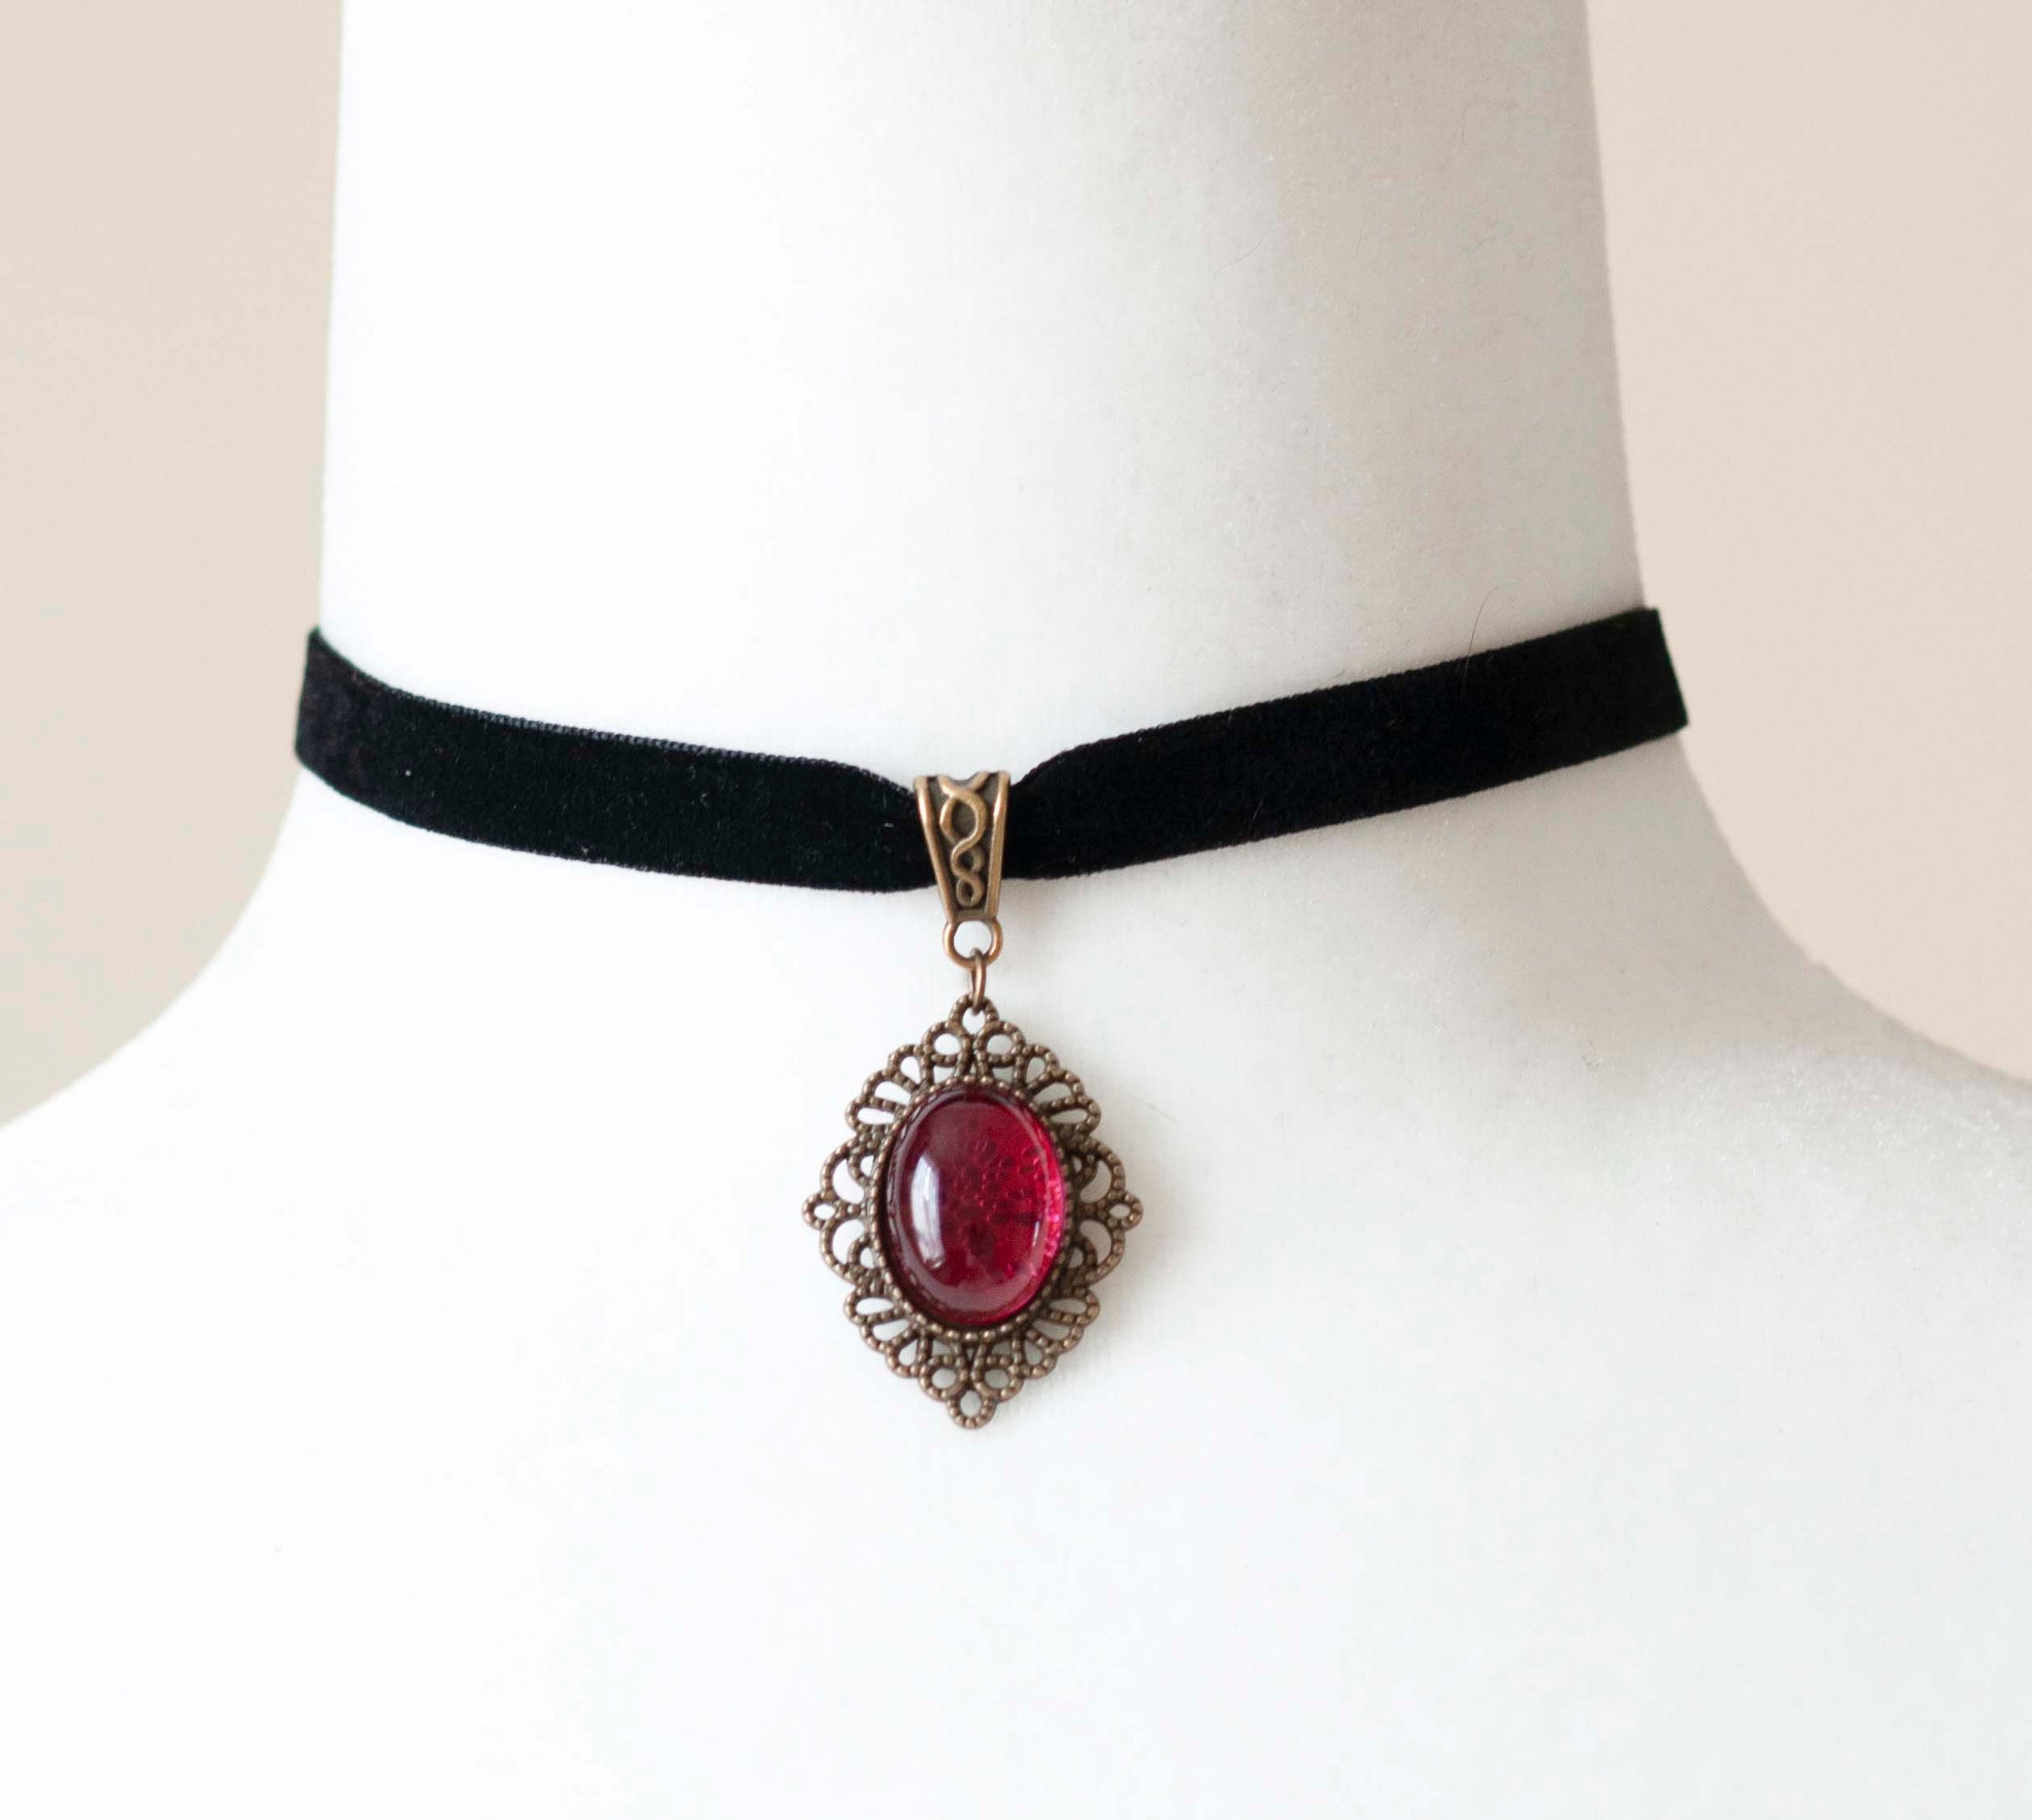 Gothic Black Velvet Choker with Blood Red pendant-Victorian Cameo